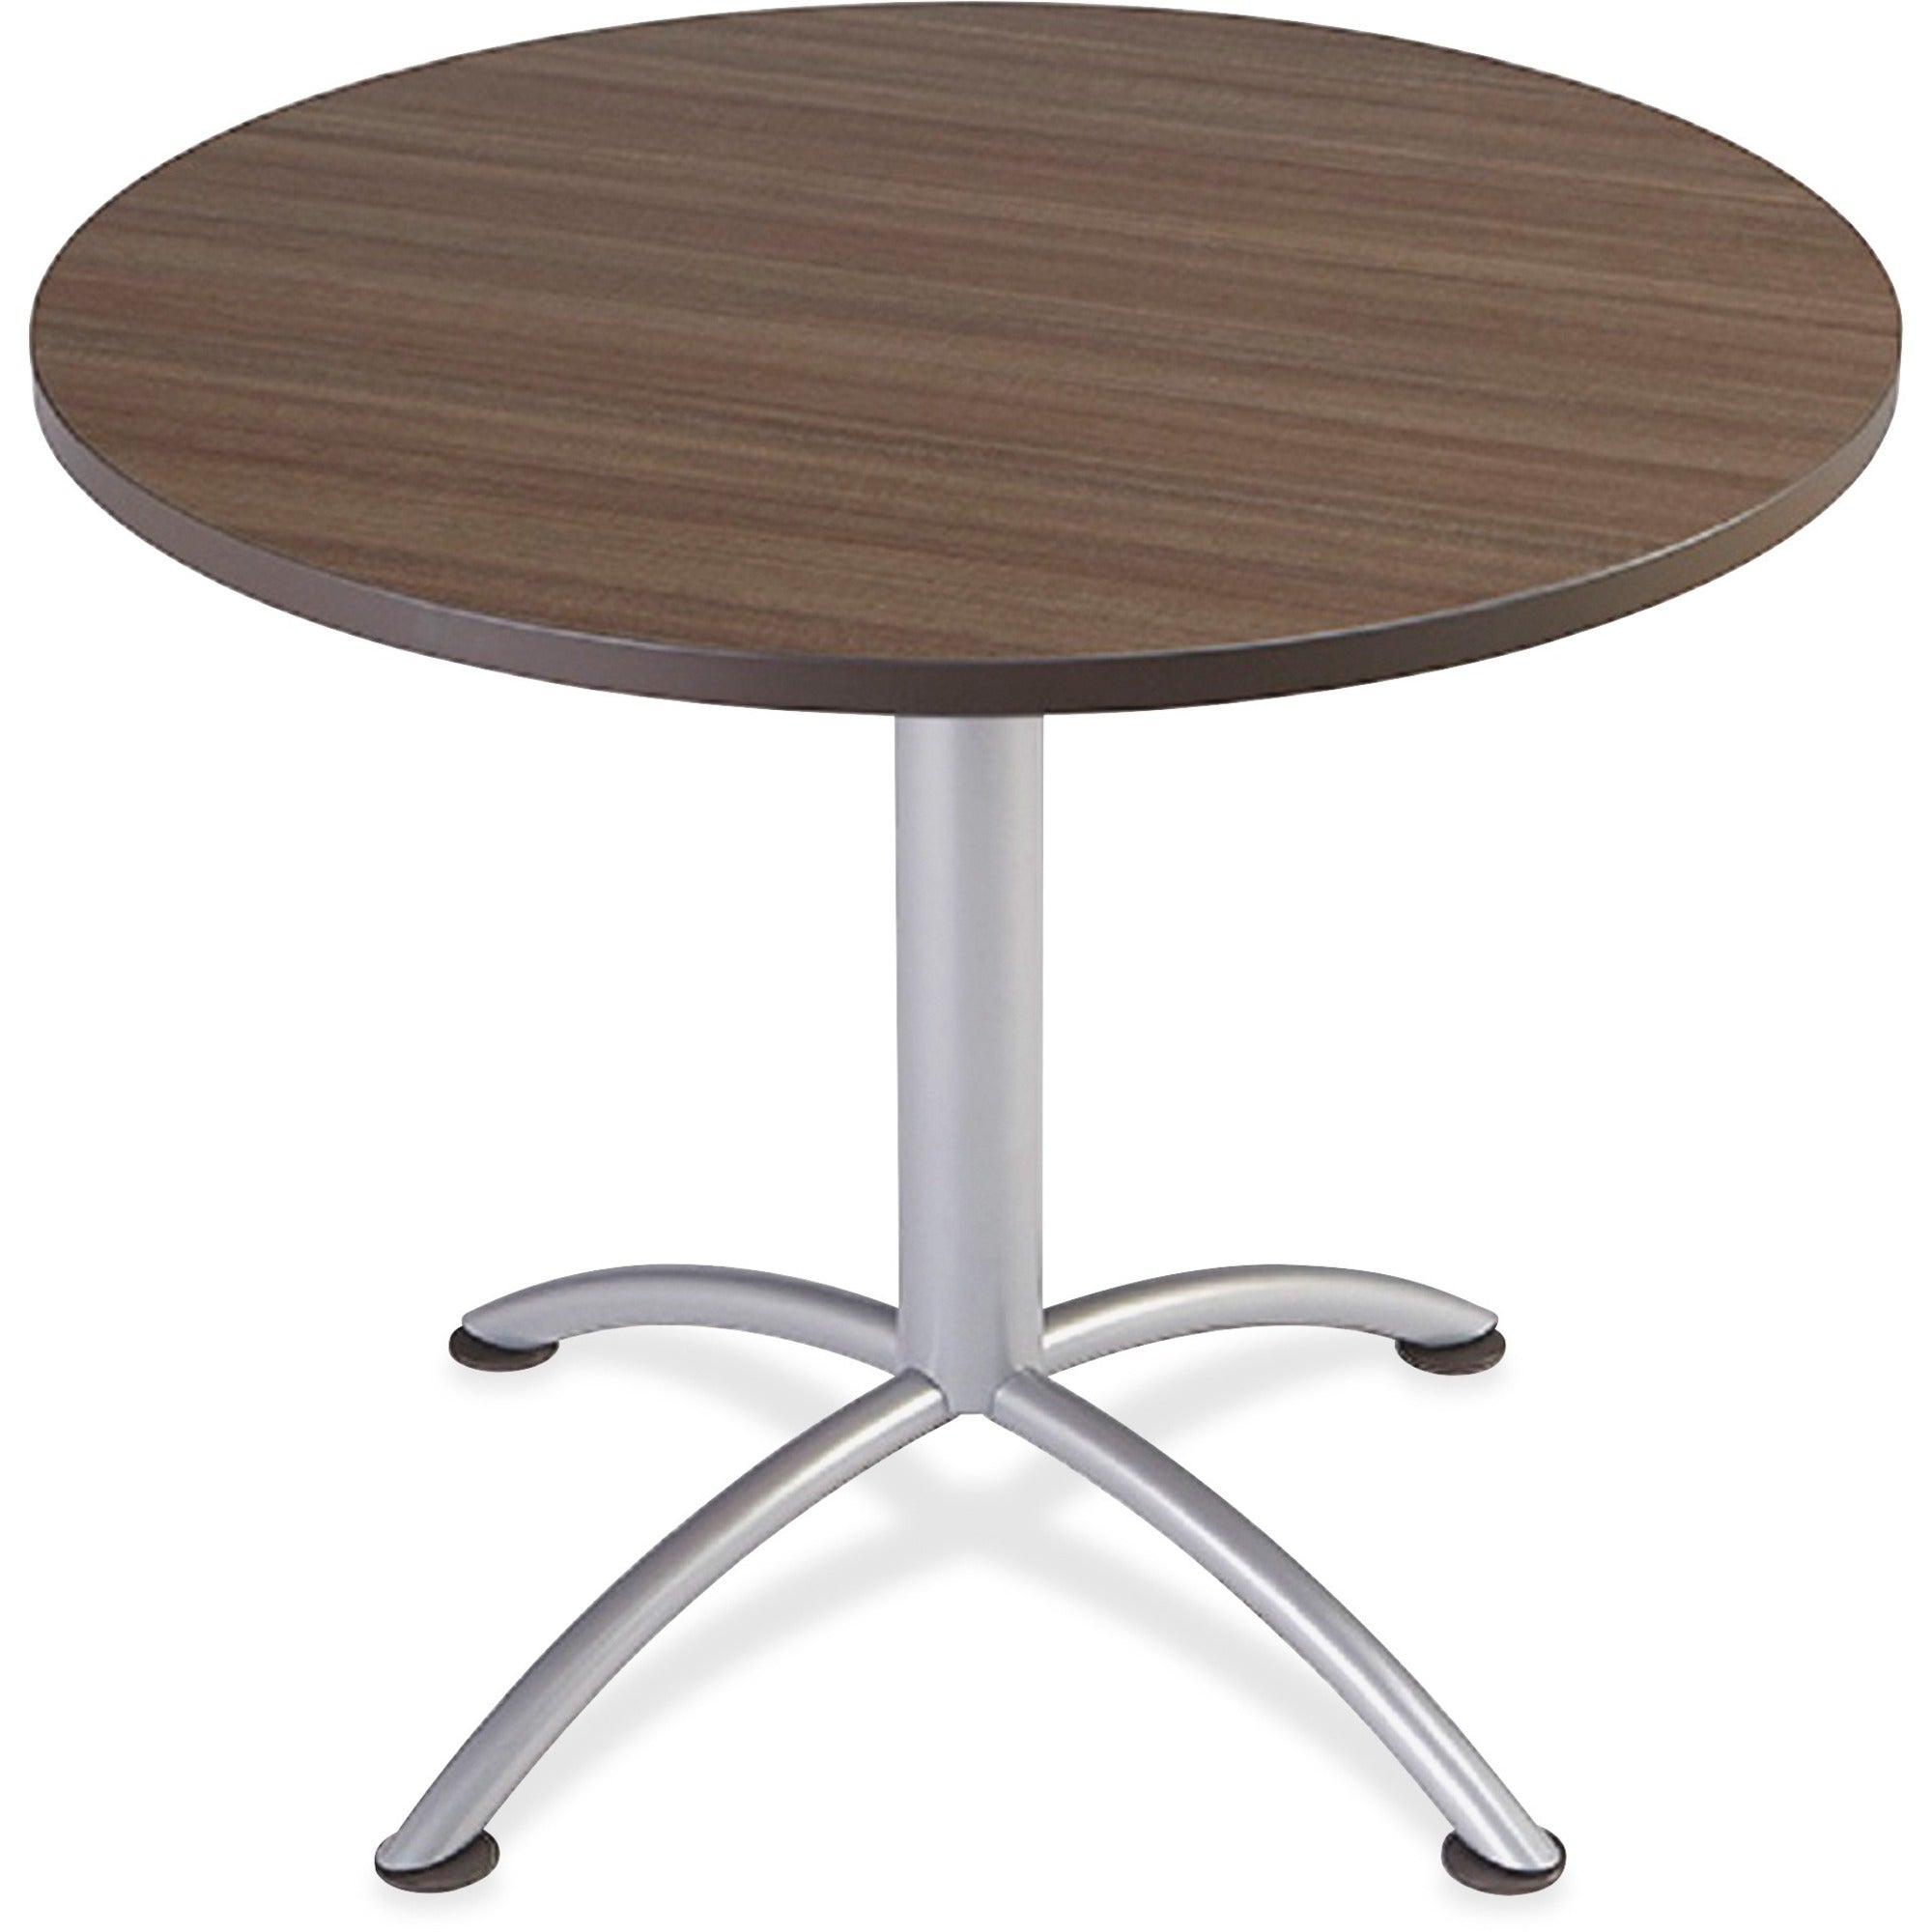 Iceberg iLand Round Hospitality Table - For - Table TopRound Top - Powder Coated Silver Base - Contemporary Style x 1.13" Table Top Thickness x 36" Table Top Diameter - 29" Height - Assembly Required - Laminated, Teak - Particleboard - 1 Each - 